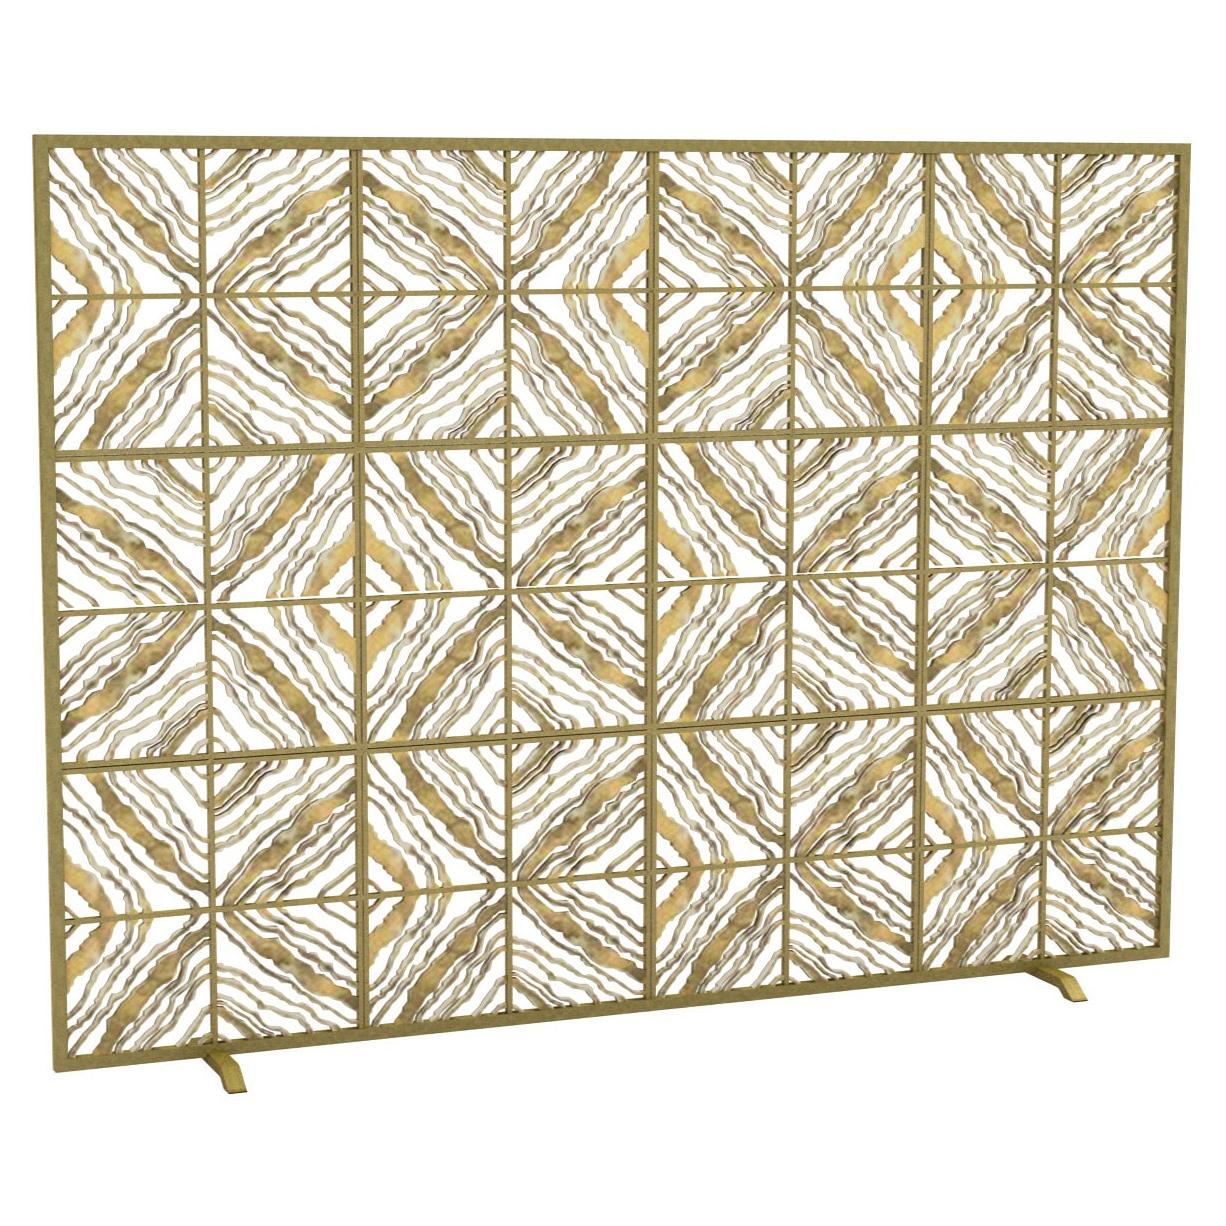 Tapestry Fireplace Screen in a Brilliant Gold Finish